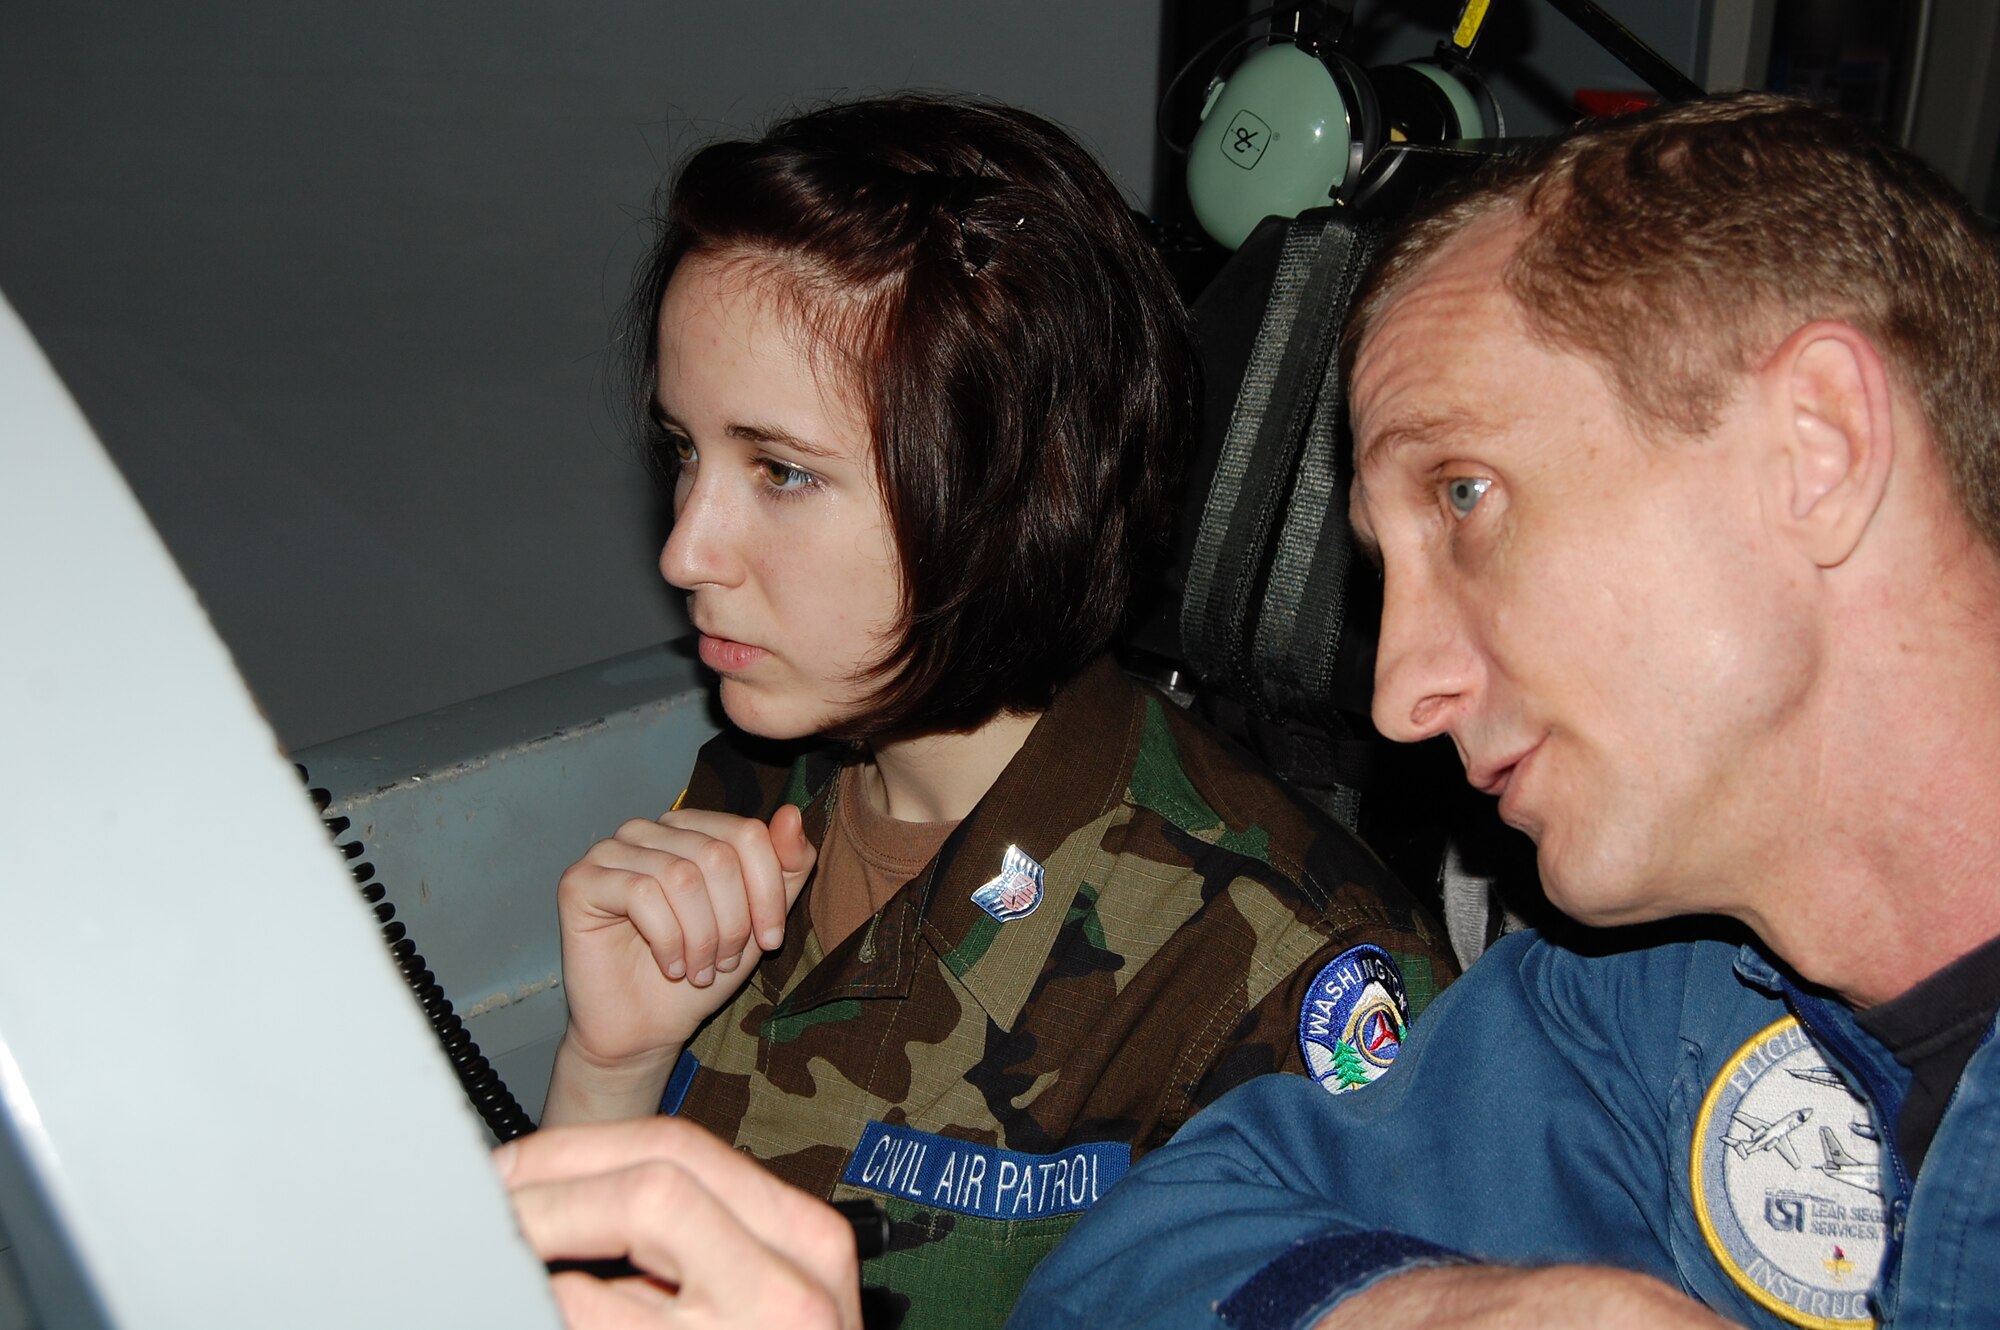 LAUGHLIN AIR FORCE BASE, Texas – Cadet Langdon Wright, Arlington Composite Squadron, Wash., focuses intently while William Turner, 47th Operations Group simulator instructor, points out mechanical detail in a T-6 simulator here June 24. Cadet Wright and 30 other Civil Air Patrol cadets participated June 18 through 26 in the Specialized Undergraduate Pilot Training Familiarization Course. The cadets traveled from across the nation to learn about the training Air Force pilots must complete before they are qualified to fly. (U.S. Air Force photo by Staff Sgt. Desiree Economides)